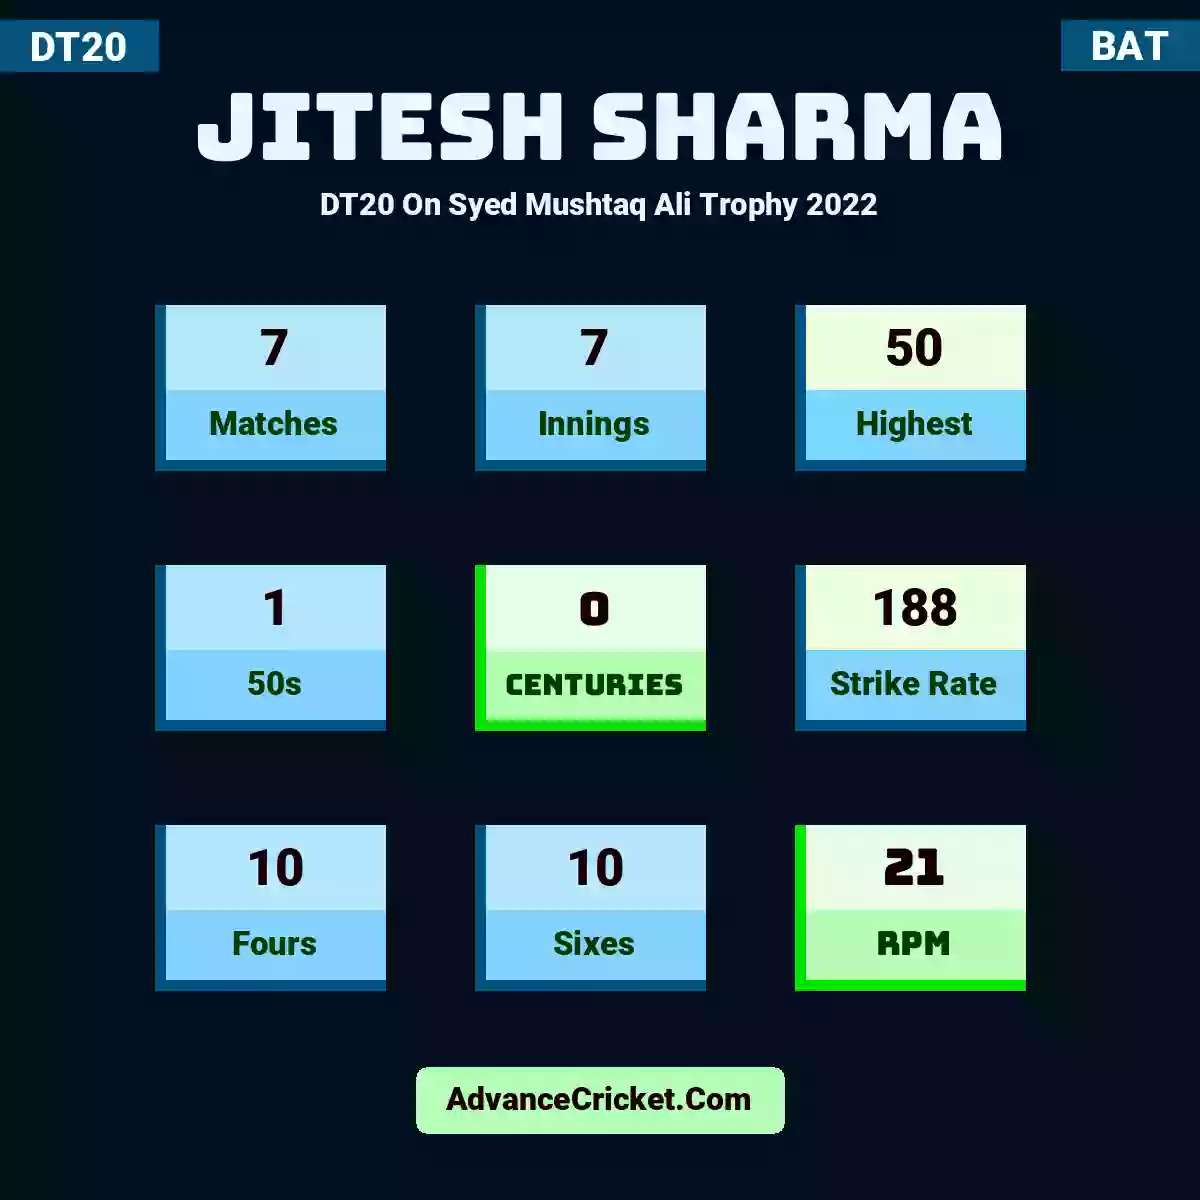 Jitesh Sharma DT20  On Syed Mushtaq Ali Trophy 2022, Jitesh Sharma played 7 matches, scored 50 runs as highest, 1 half-centuries, and 0 centuries, with a strike rate of 188. J.Sharma hit 10 fours and 10 sixes, with an RPM of 21.